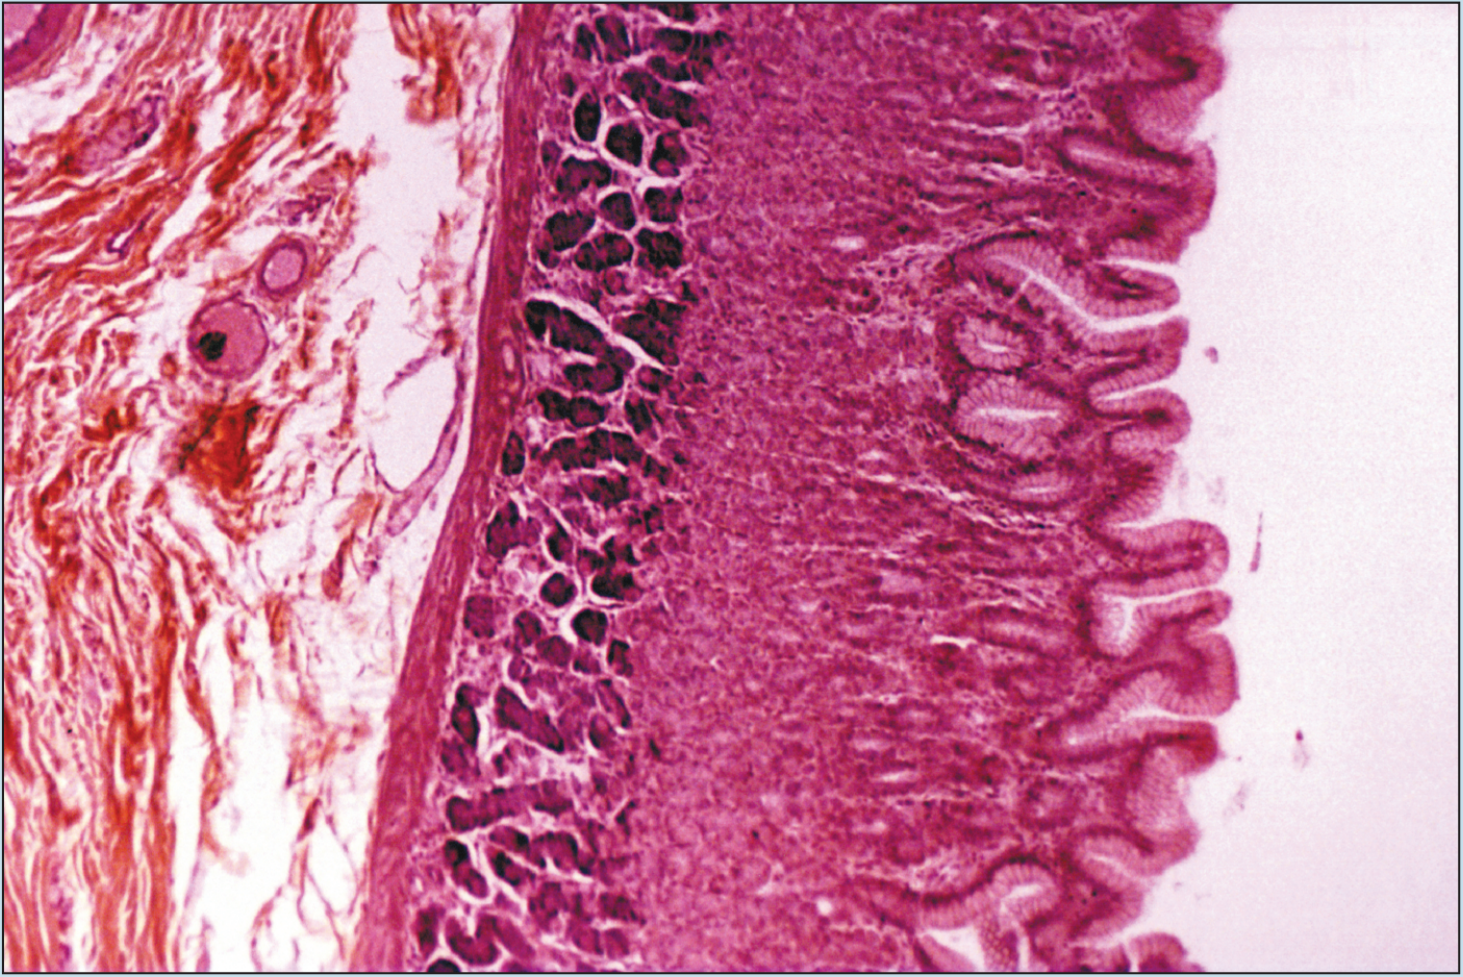 Slide image of fundic stomach - 50× magnification